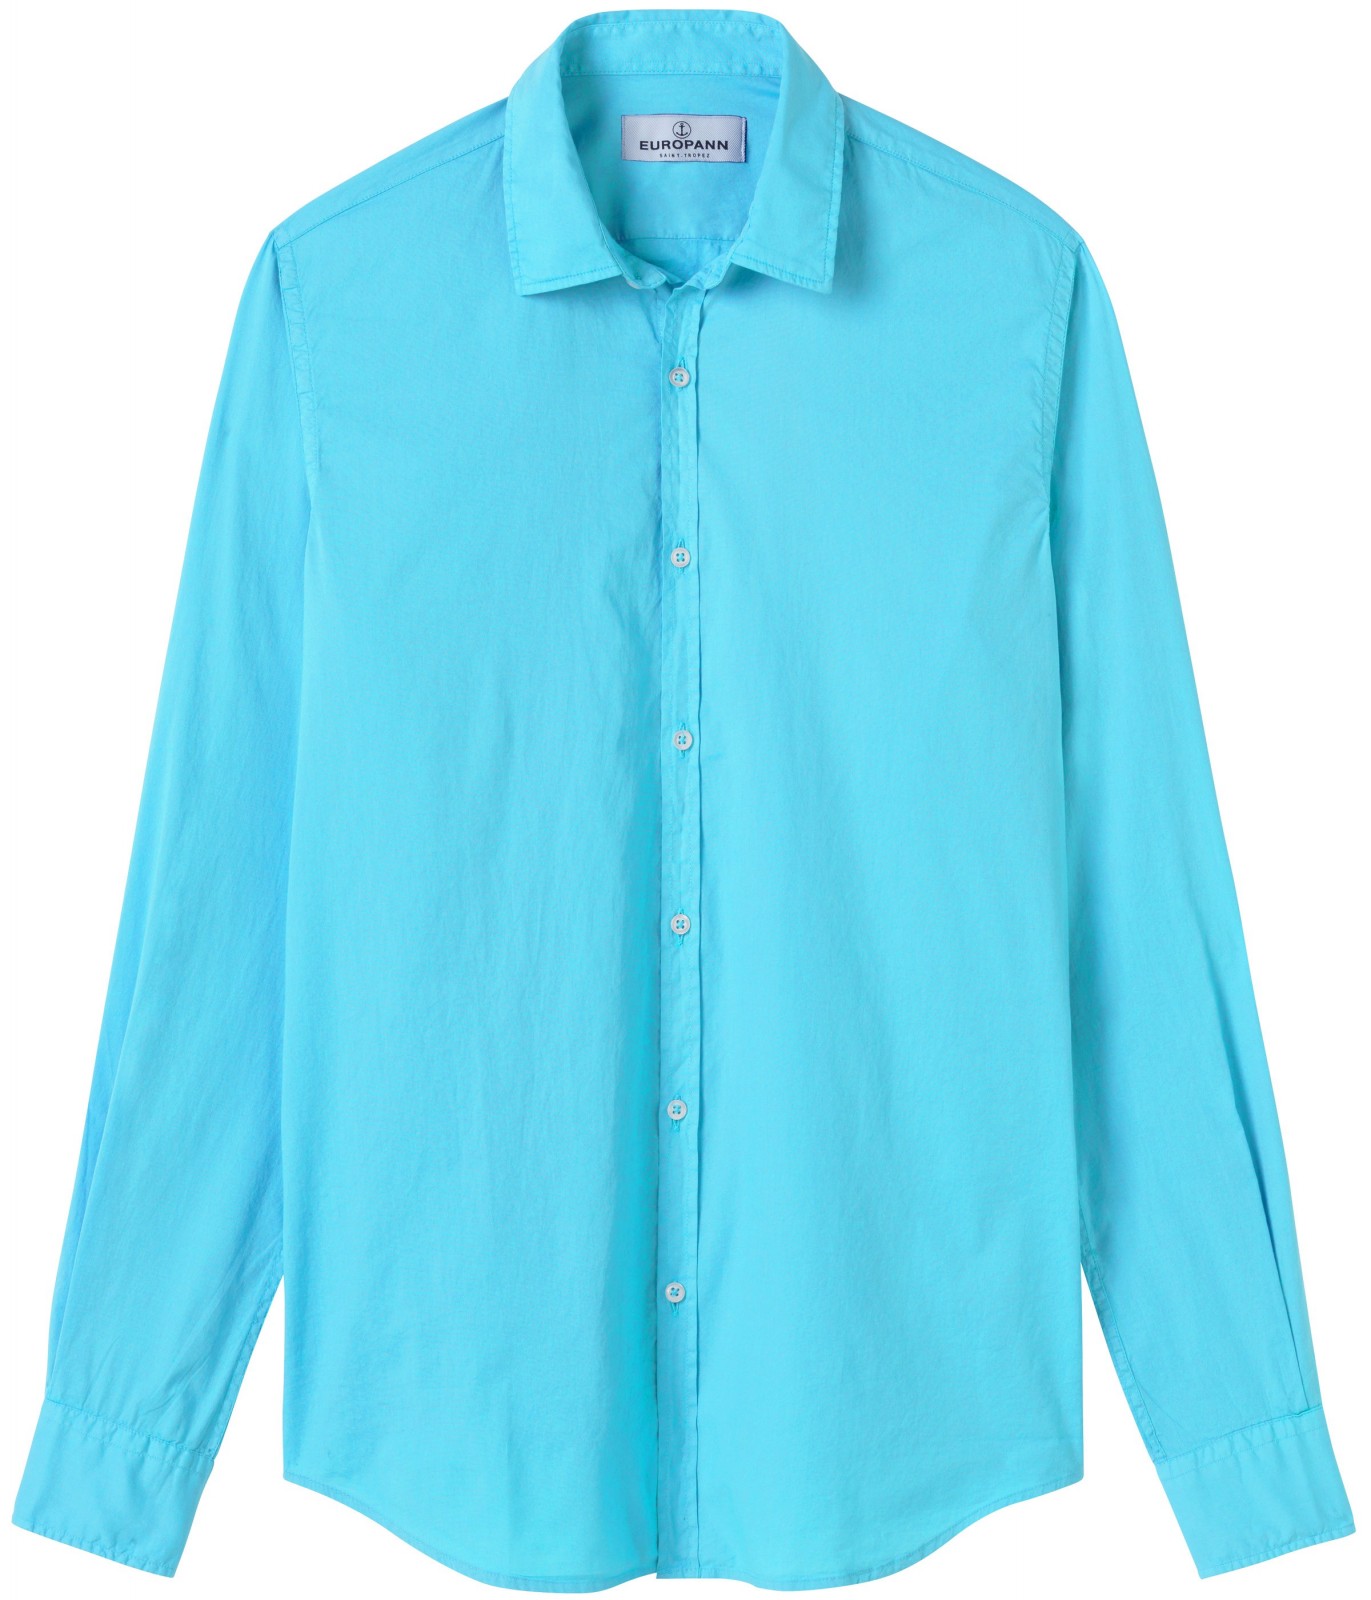 Plain turquoise blue color long sleeves ...